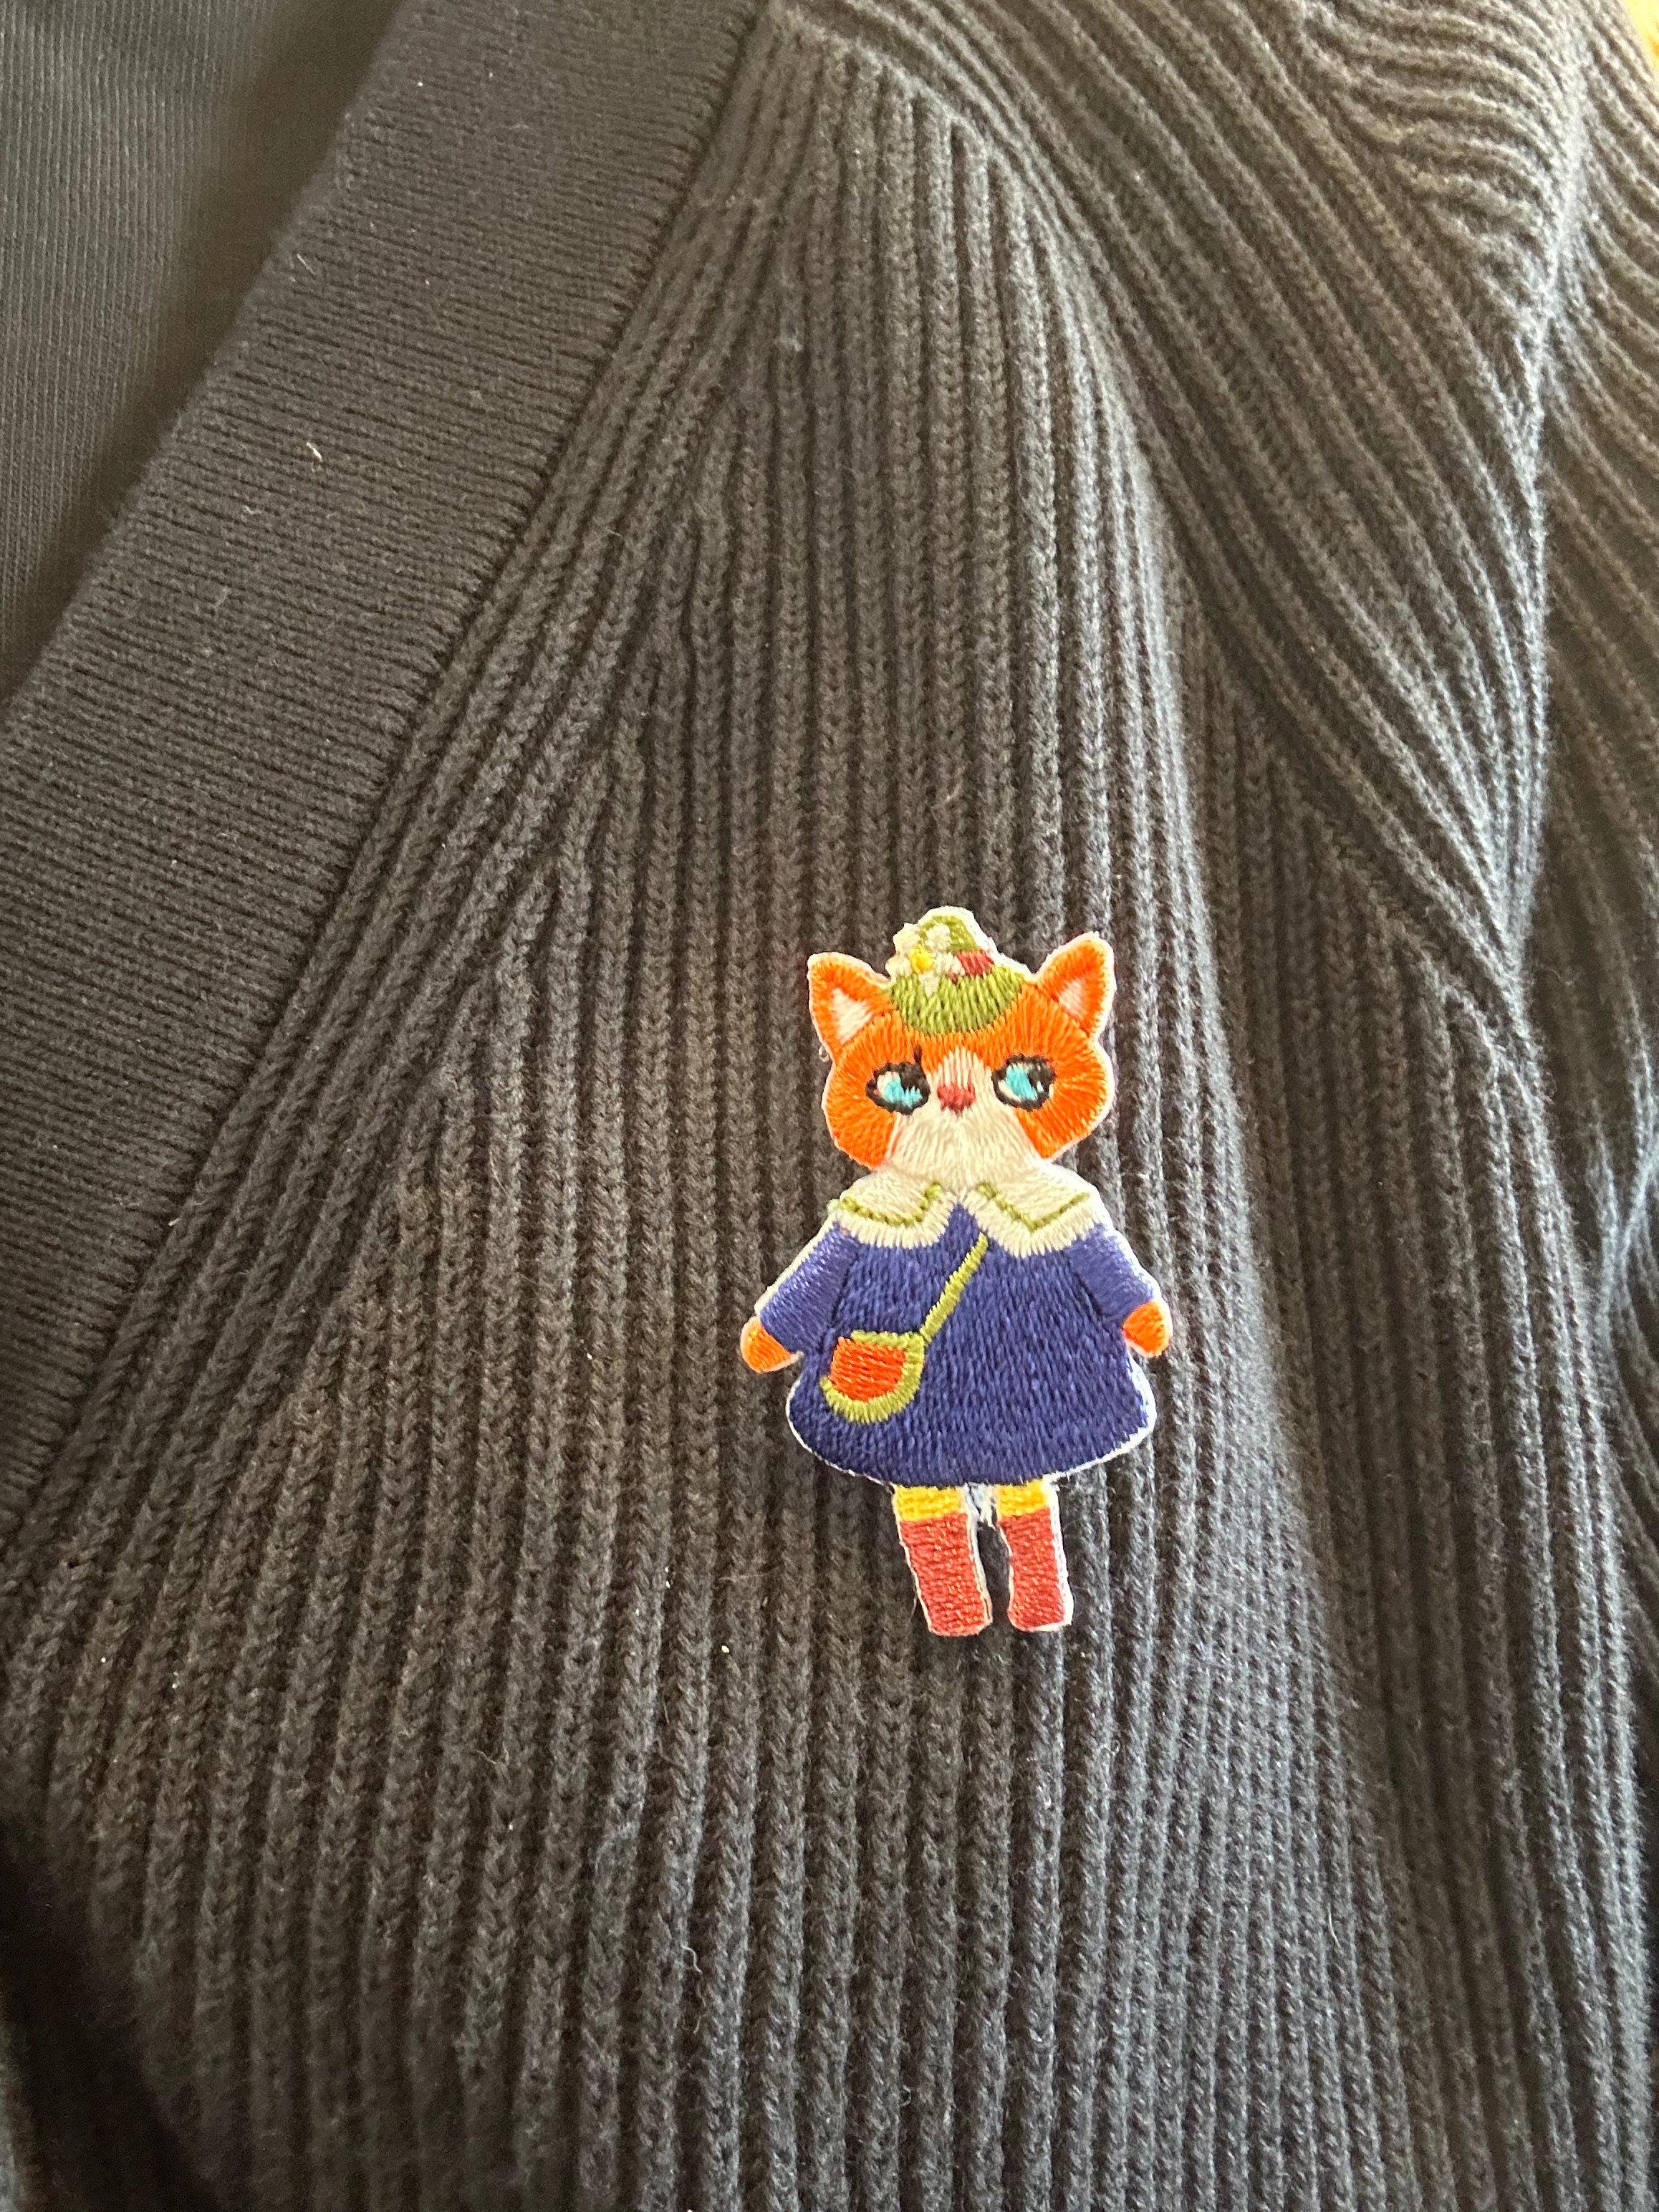 Embroidered Cat Pin Badge - Cat in a Dress